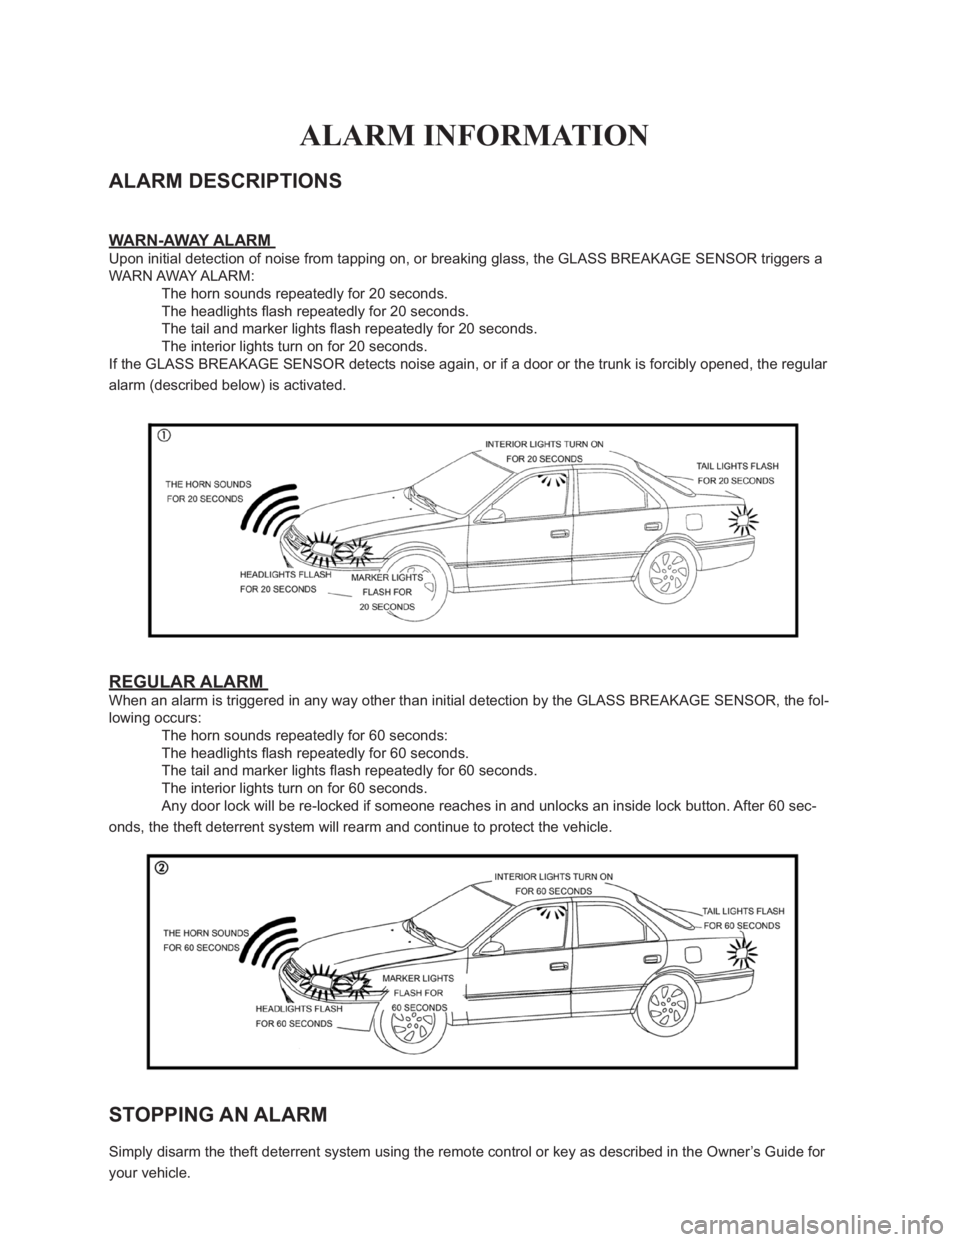 TOYOTA VENZA 2011  Accessories, Audio & Navigation (in English) ALARM INFORMATION
ALARM DESCRIPTIONS 
WARN-AWAY ALARM 
Upon initial detection of noise from tapping on, or breaking glass, the GLASS BREAKAGE SENSOR triggers a 
WARN AWAY ALARM: 
� �7�K�H��K�R�U�Q�